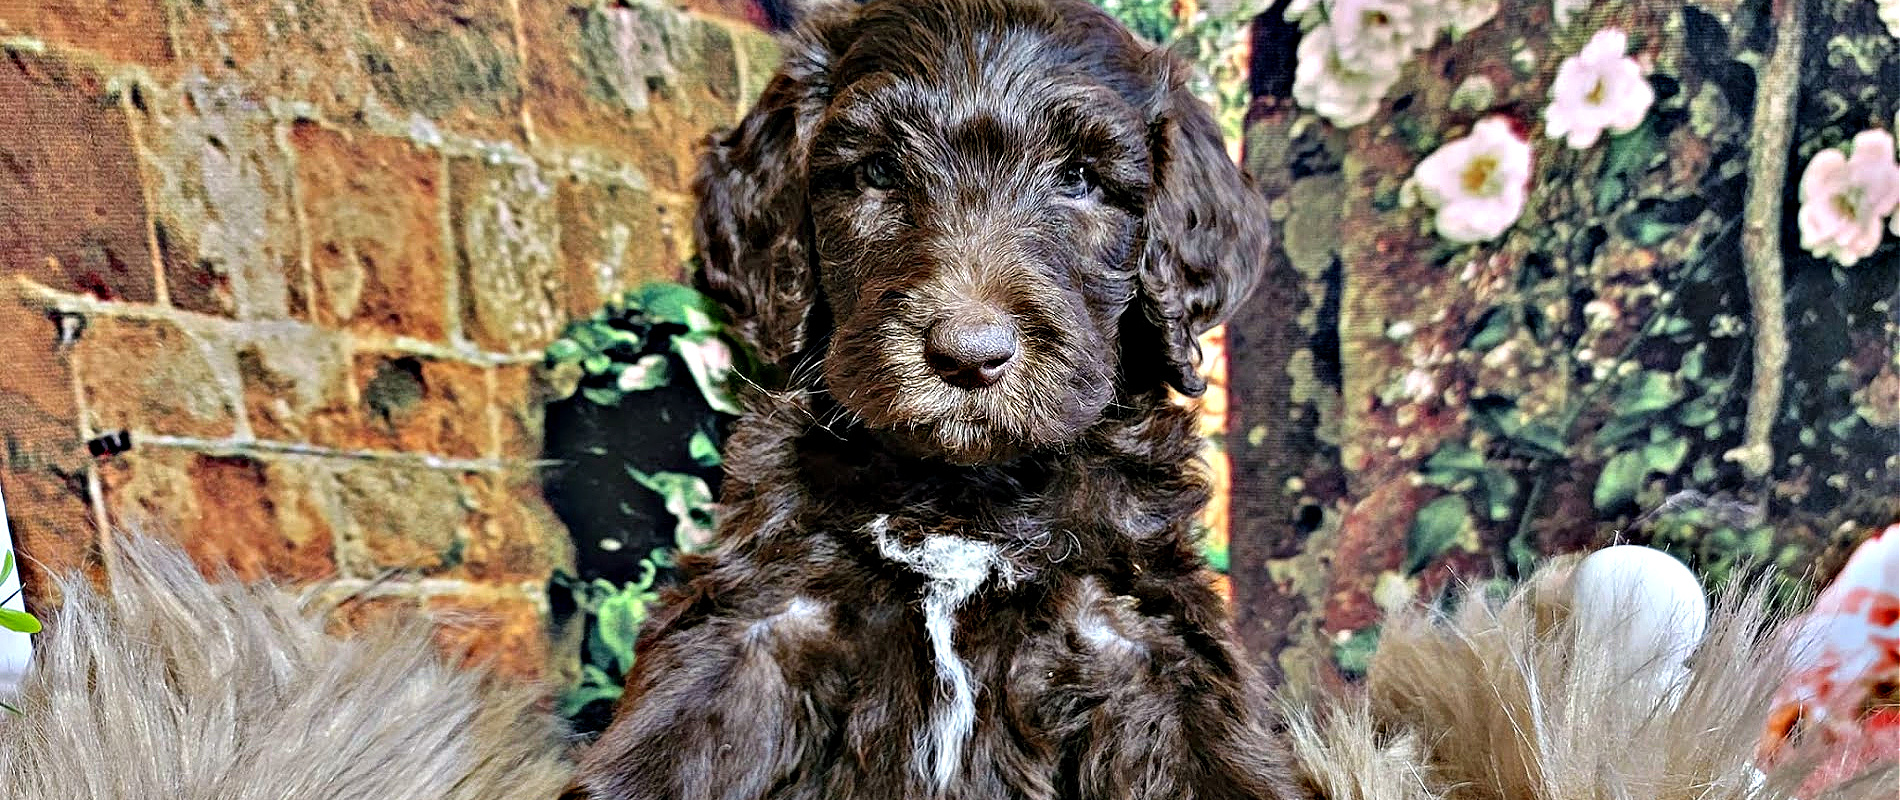 The F1b Labradoodle